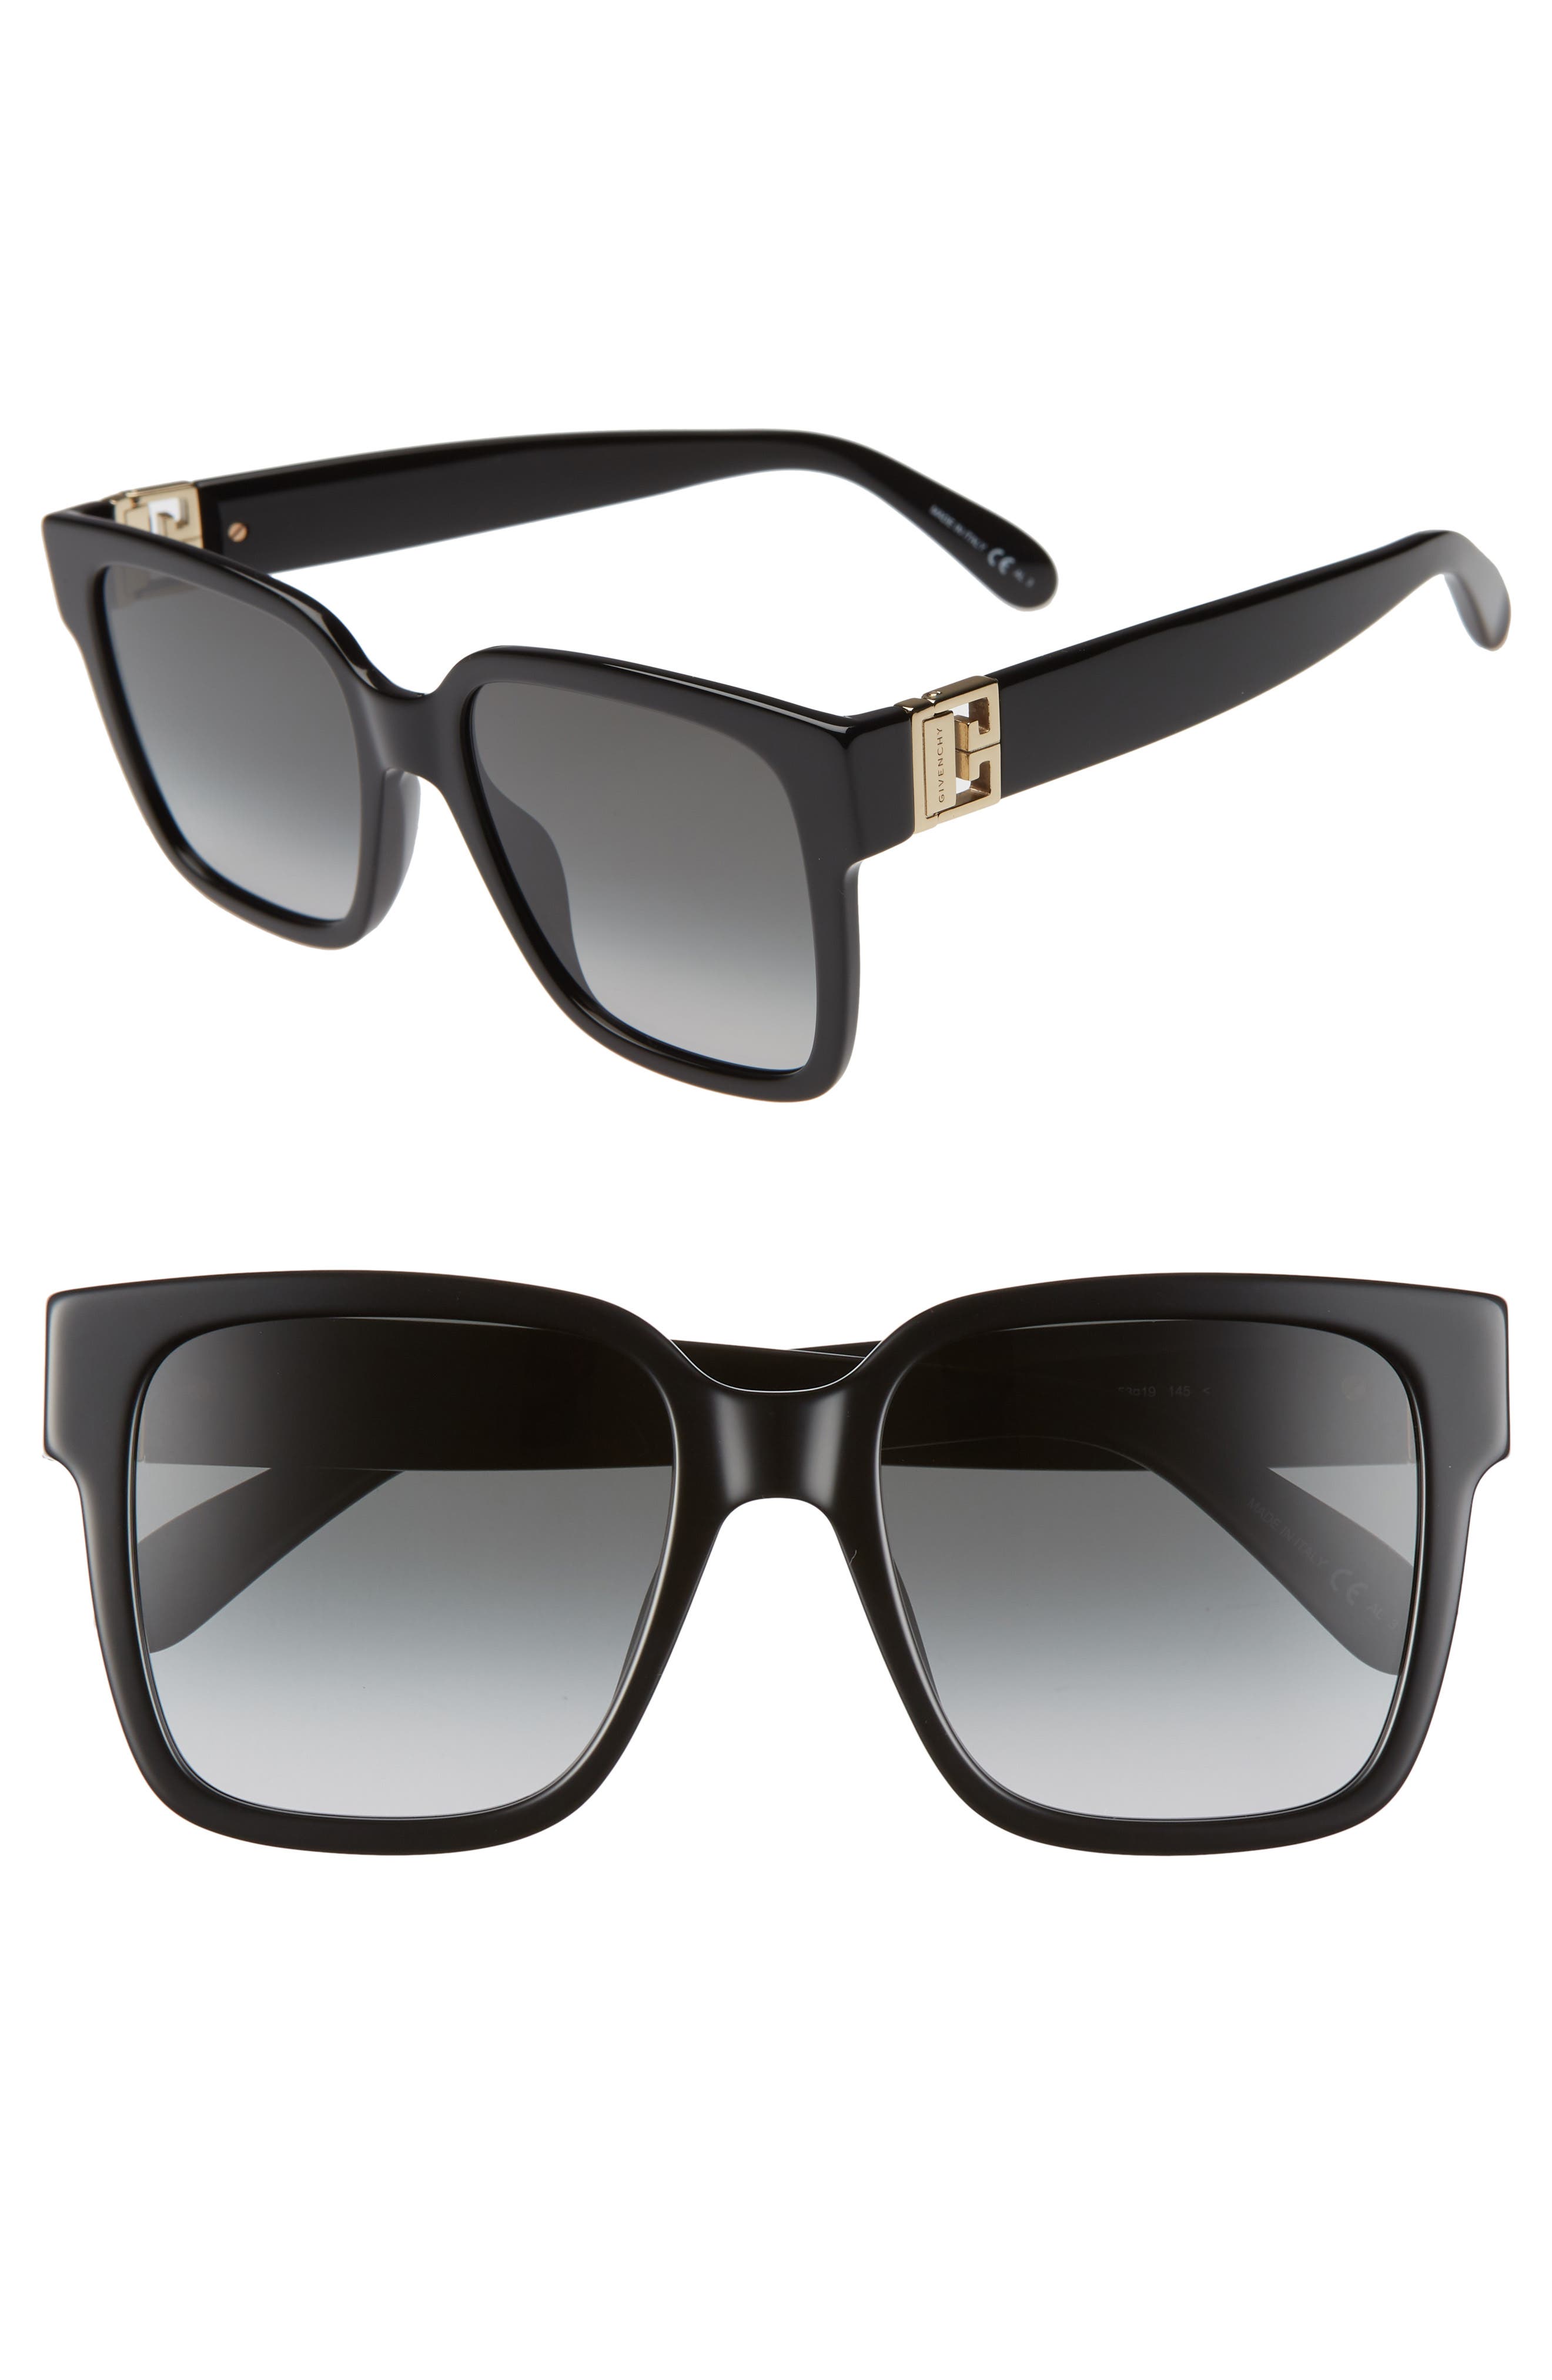 givenchy sunglasses price